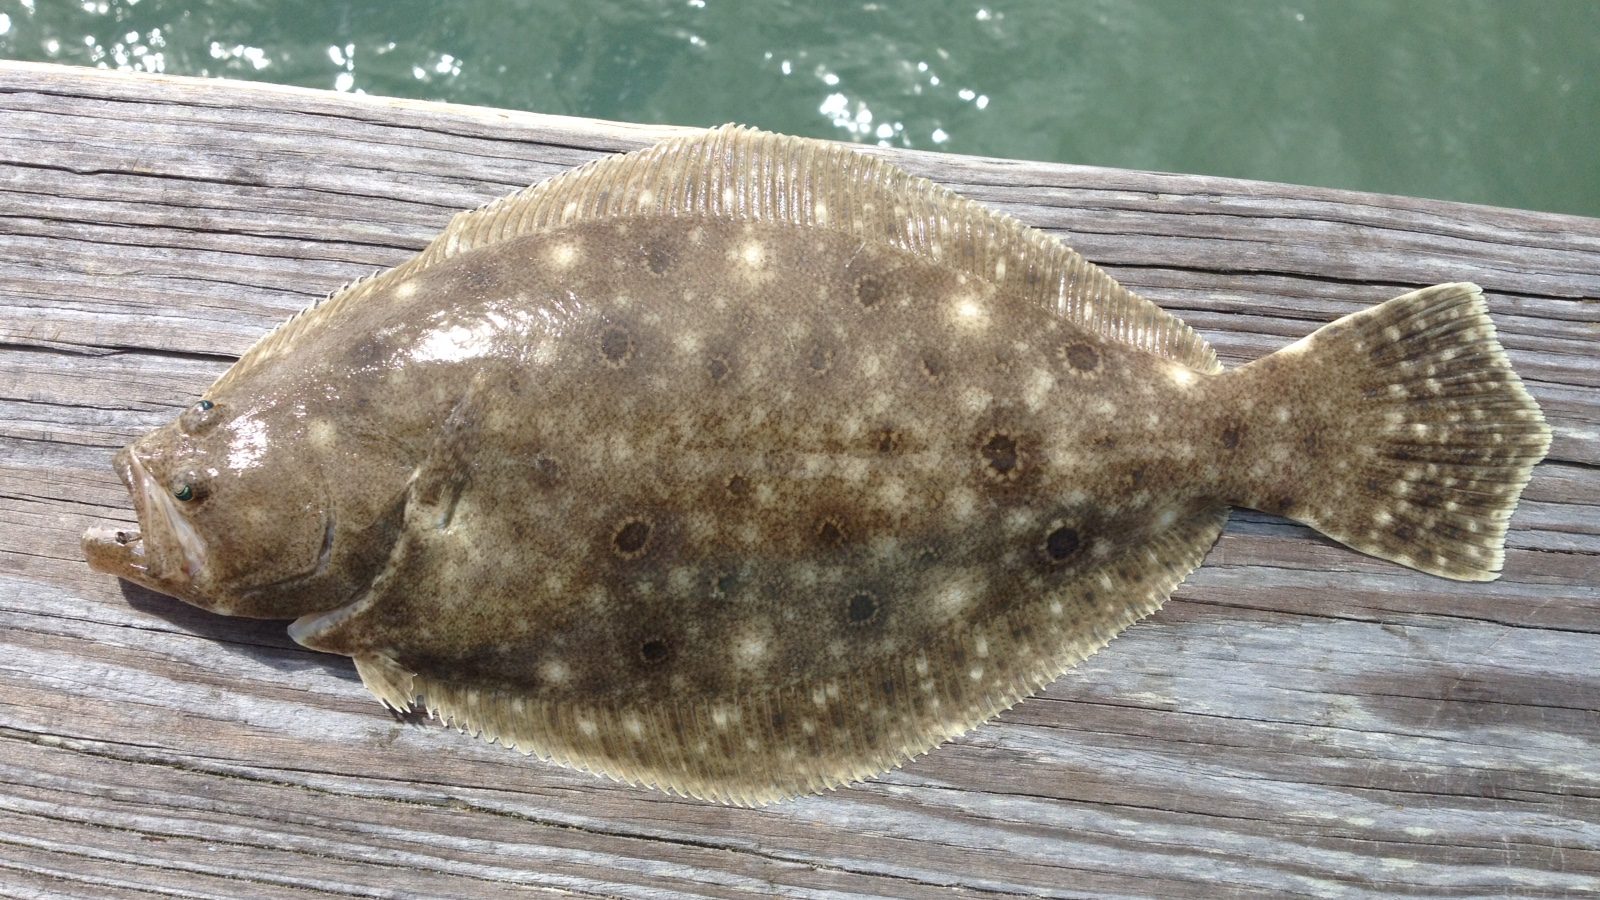 Commercial flounder season in N.C. internal waters comes to end